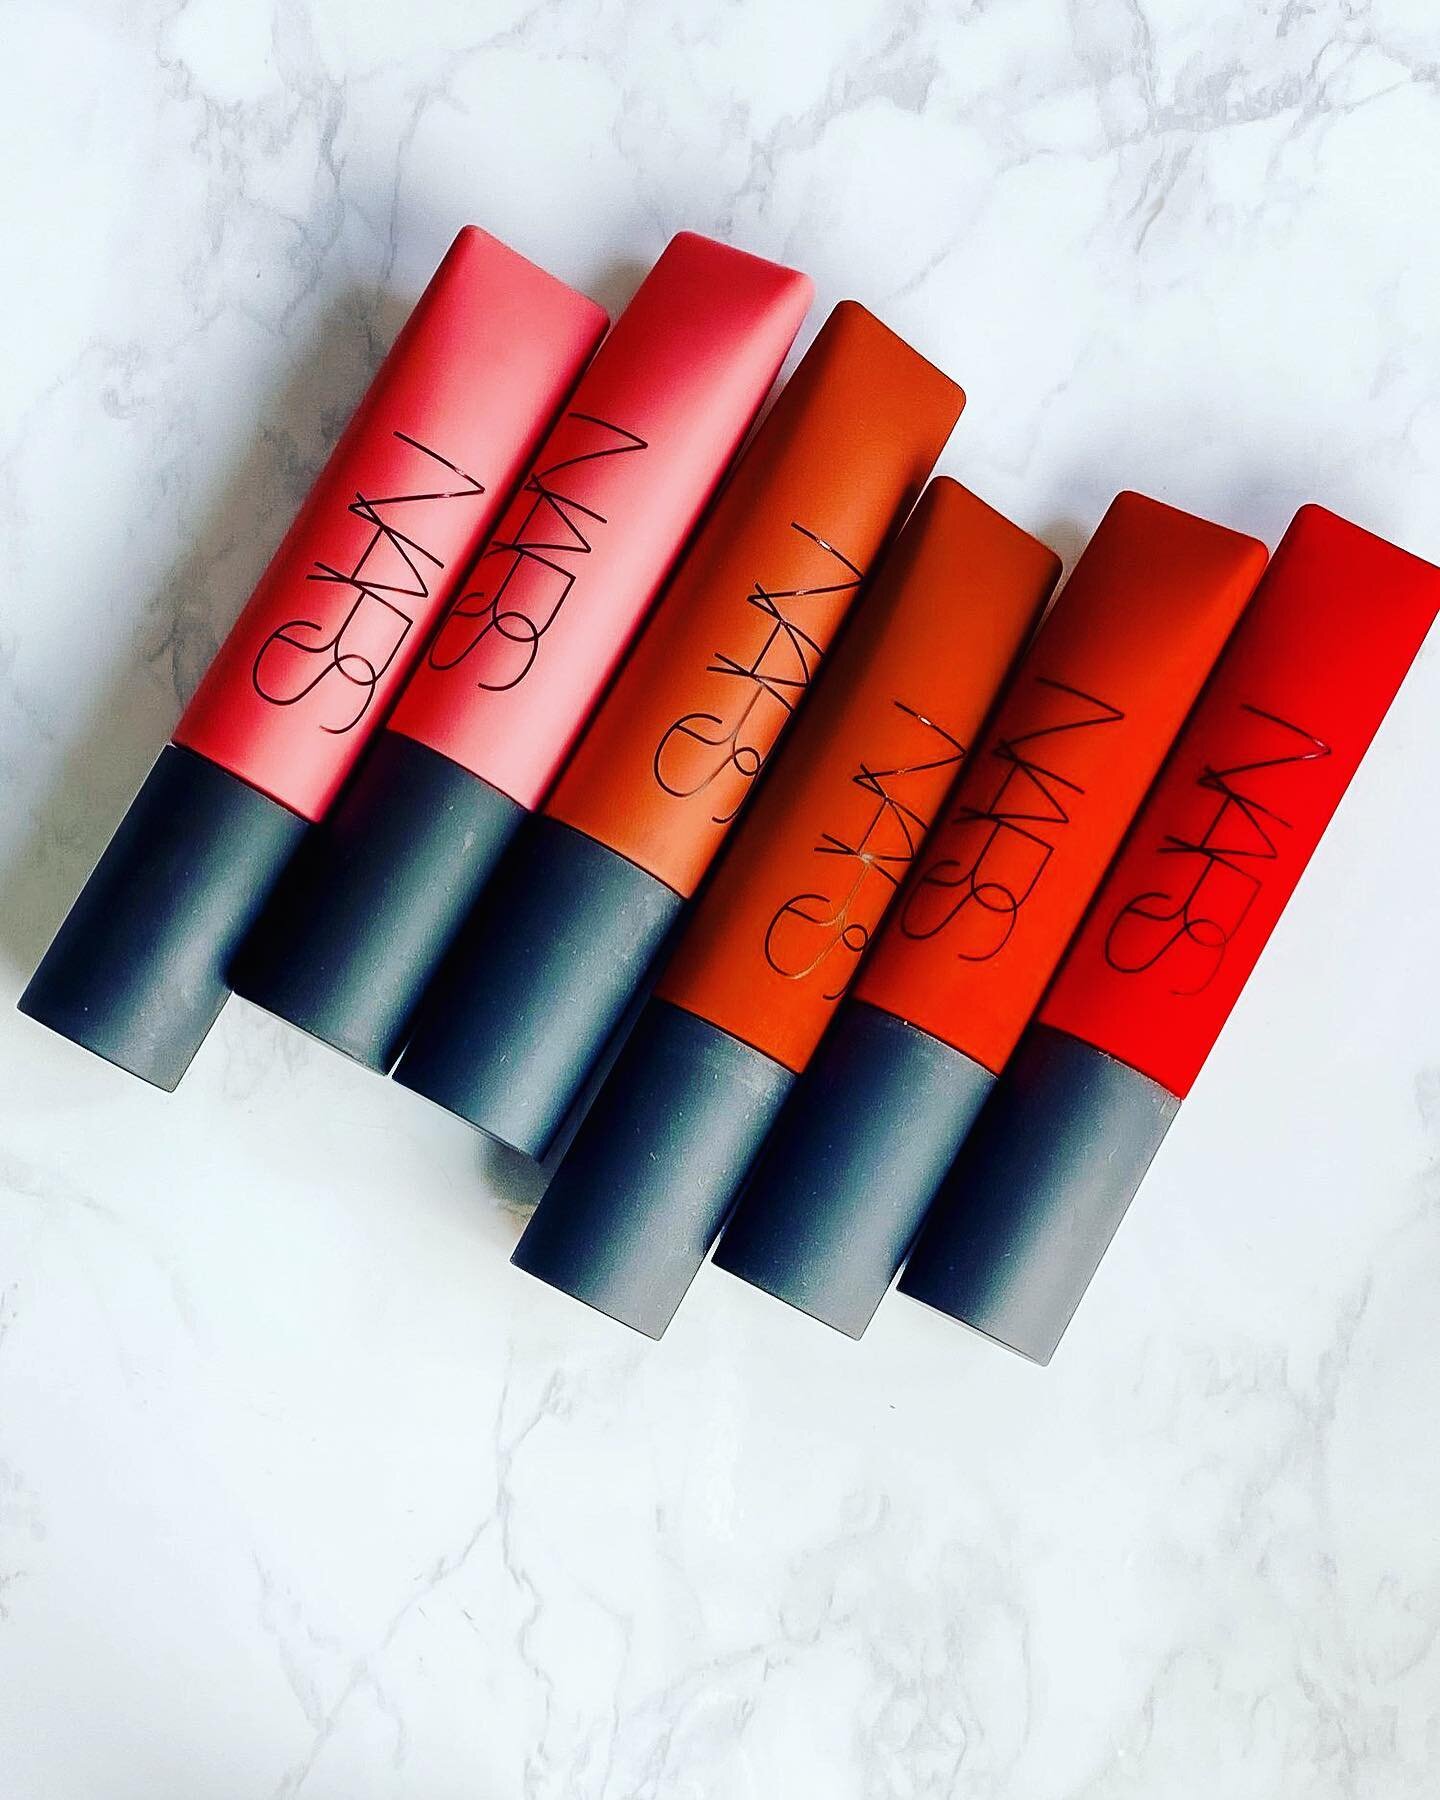 If you are into lip color of any kind, listen up for the latest from NARS. They recently relaunched Air Matte Lip Color and added six new shades to the lineup; it is beyond anything I expected. &hearts;️

@NARSissist Air Matte Lip Color is like a nex